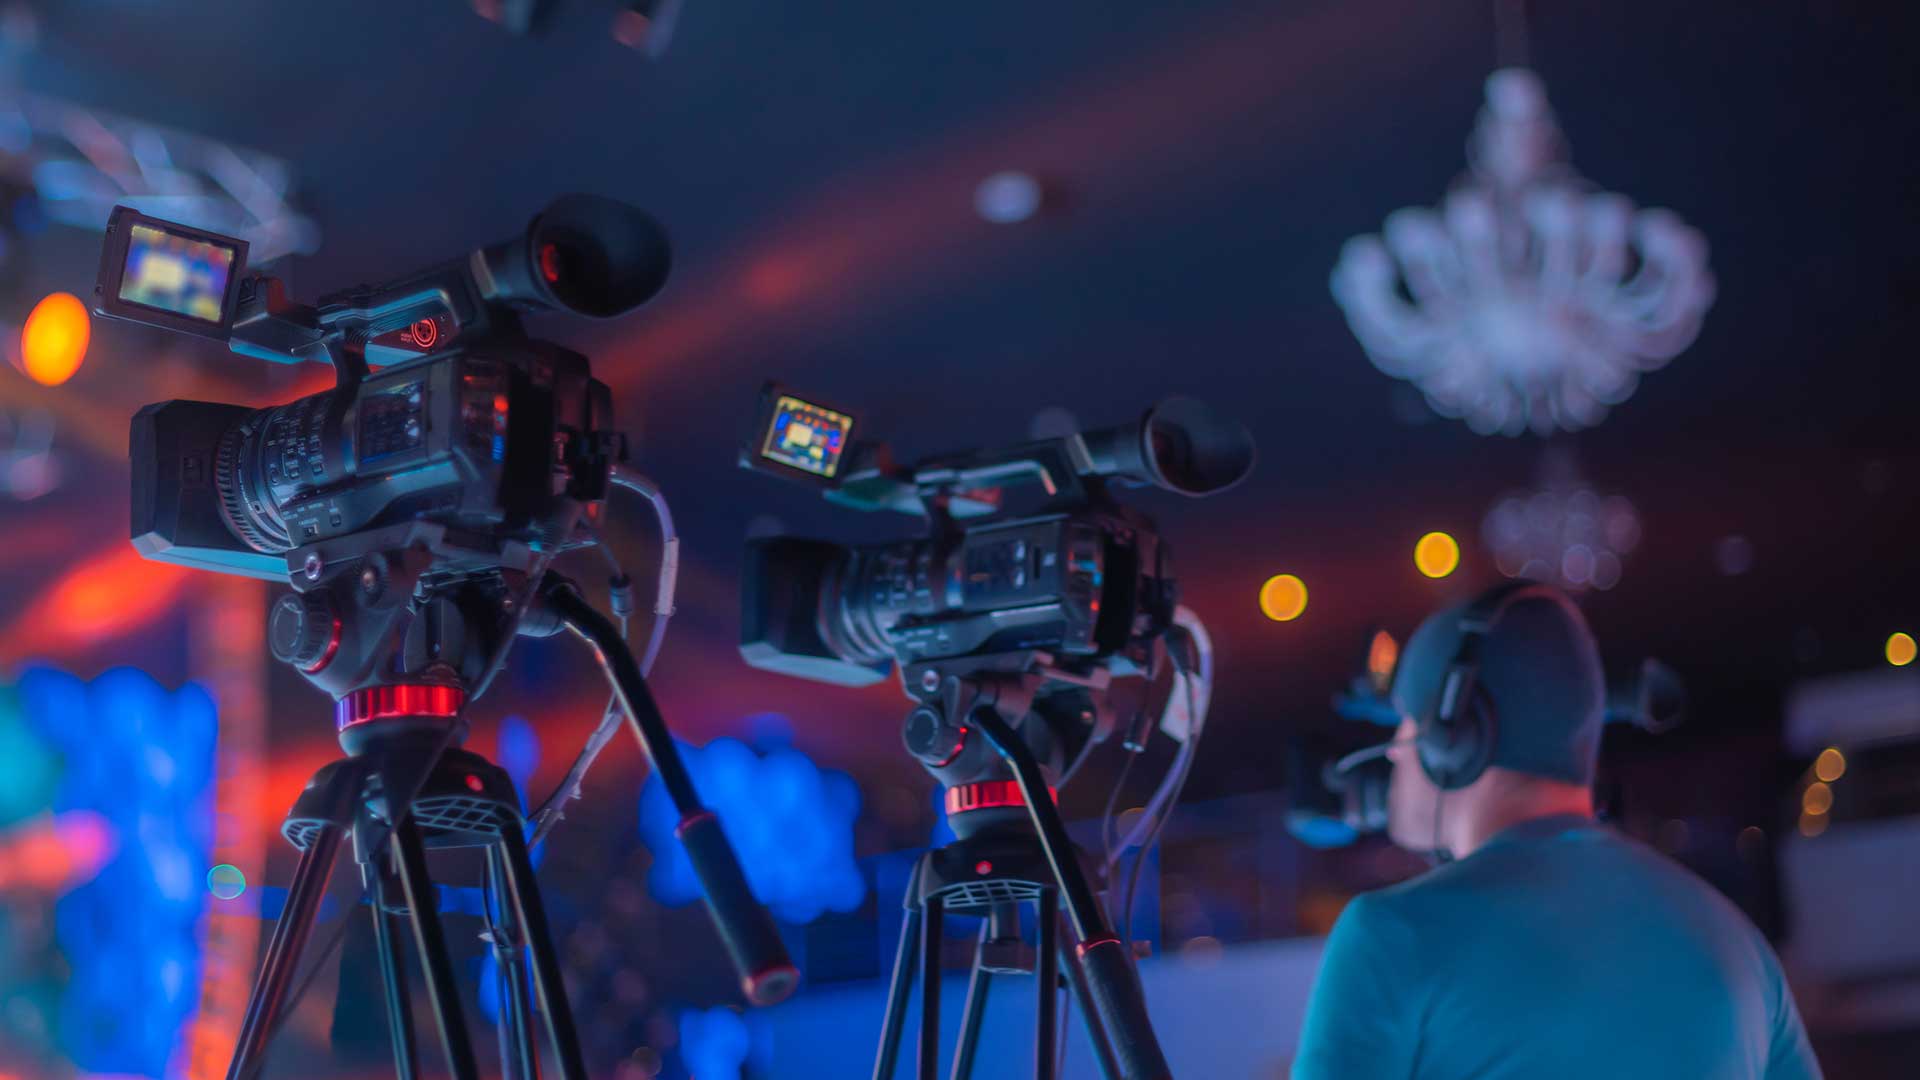 The Advantages of Professional and High-Quality Broadcast at Your Member Meeting